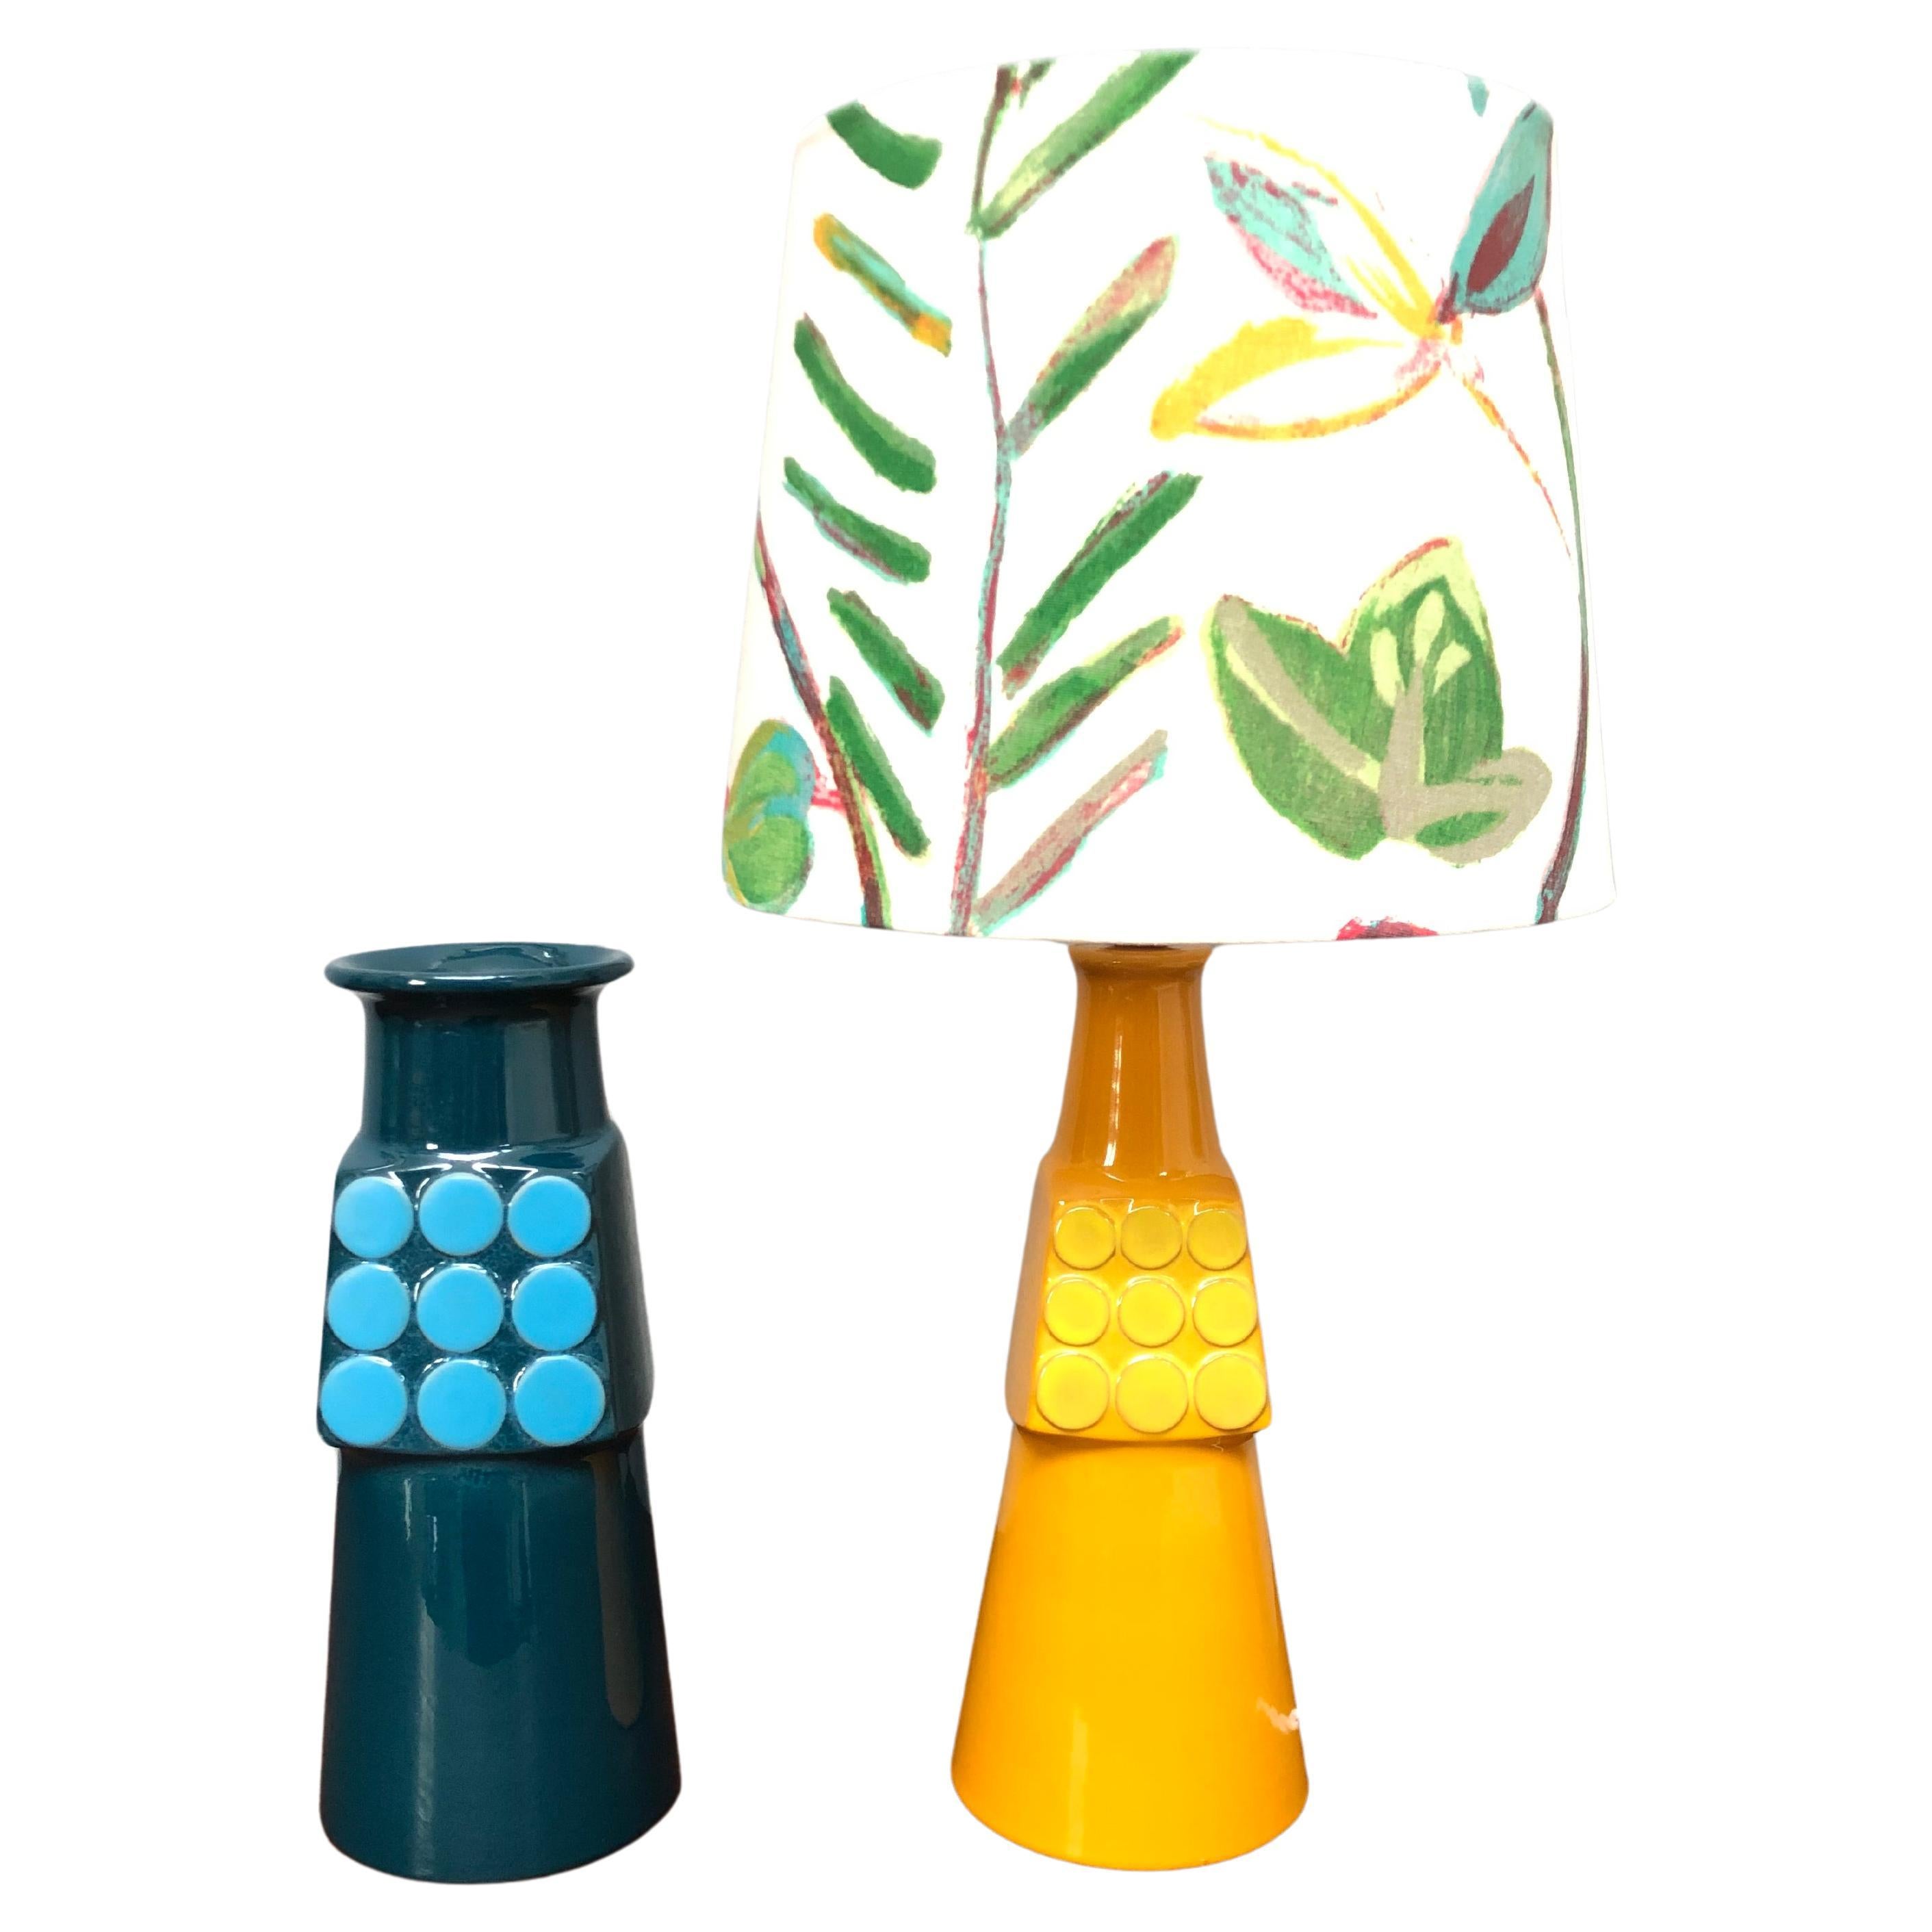 A Vintage Pottery Table Lamp From Knabstrup Of Denmark With Matching Vase For Sale